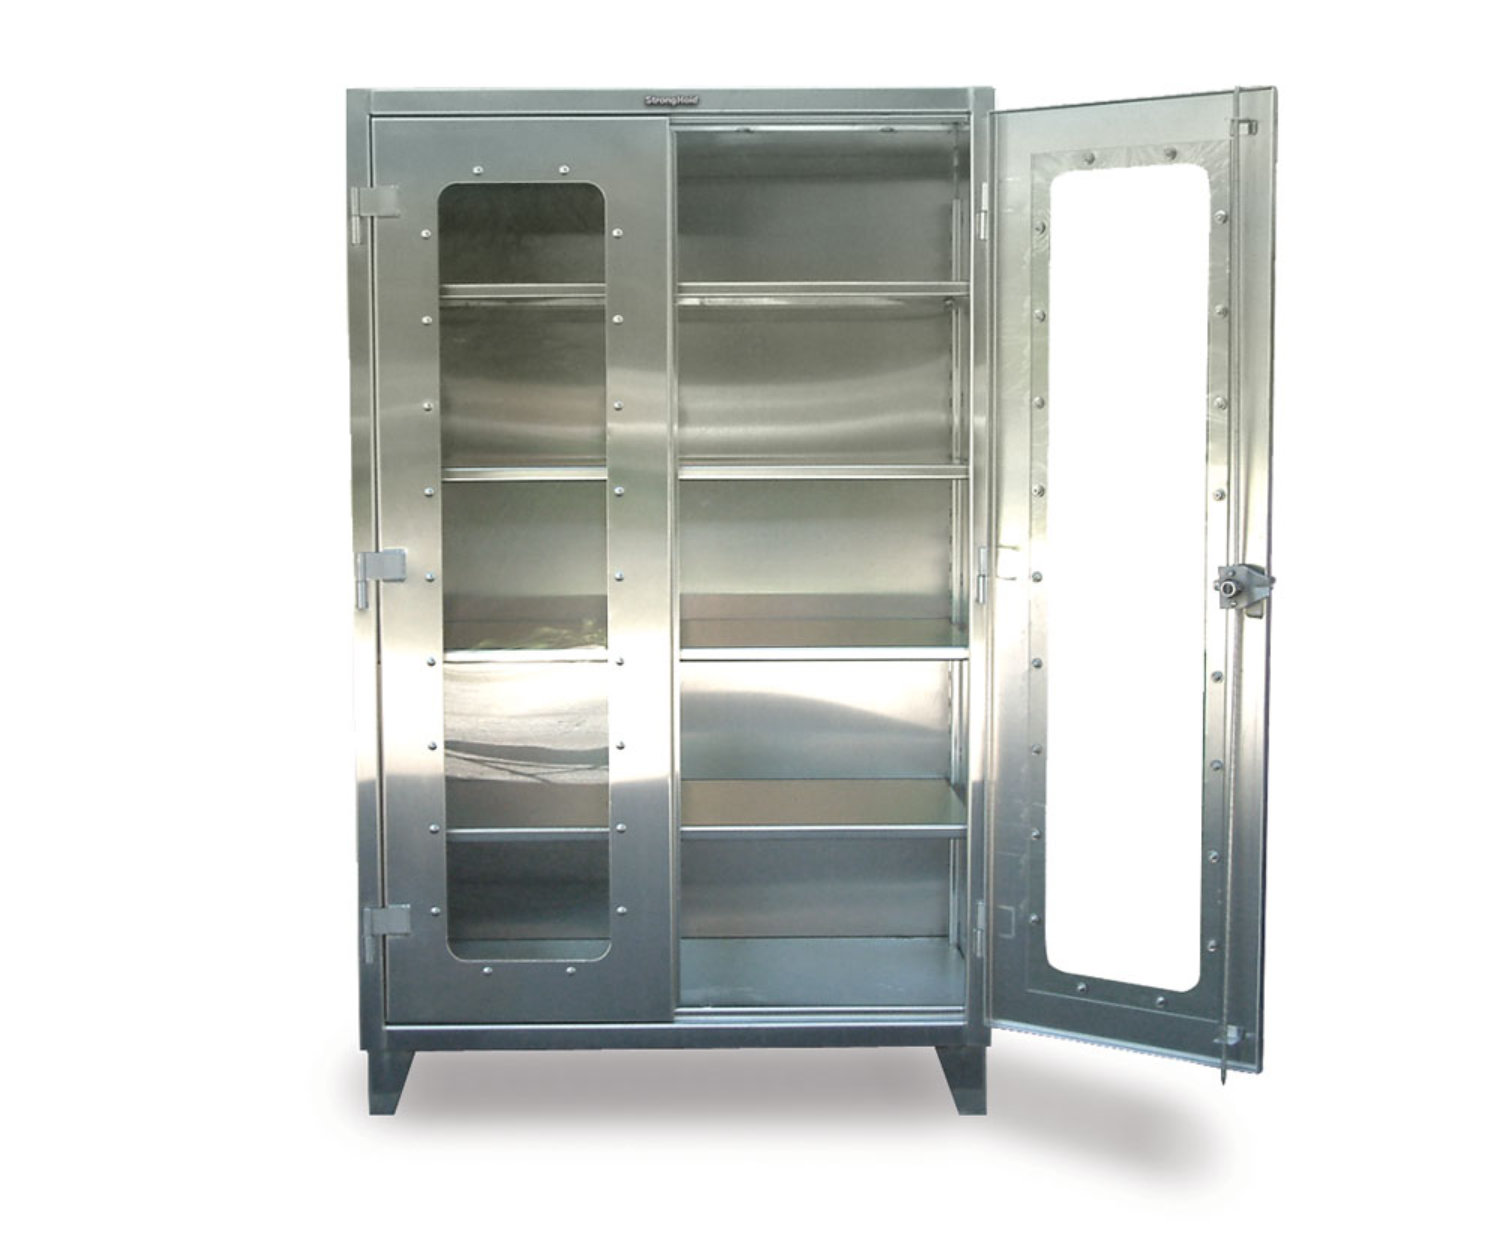 https://madeinusatools.com/wp-content/uploads/2020/06/stainless-steel-clear-view-cabinet.jpg